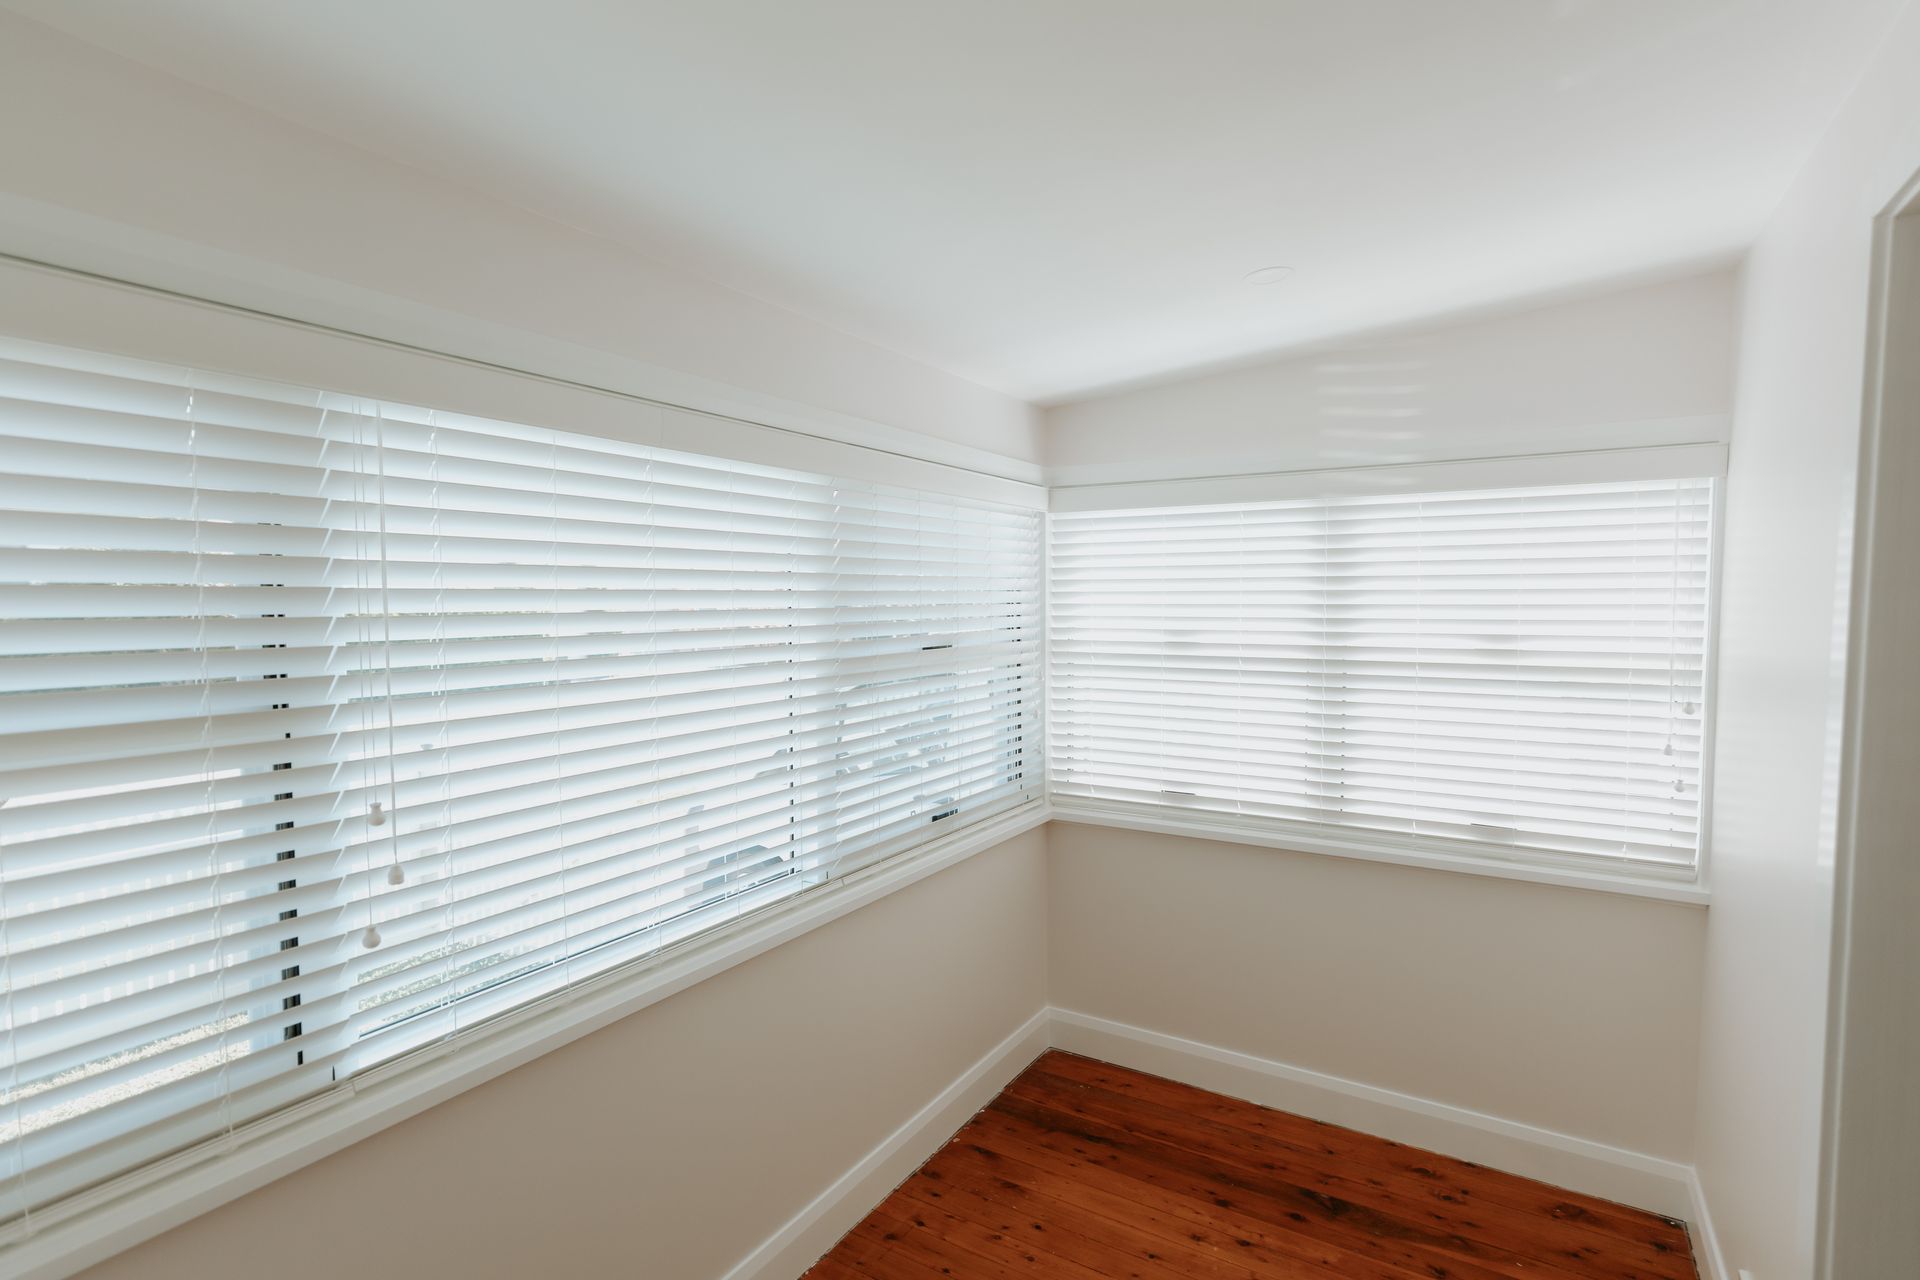 An Empty Room with Wooden Floors and White Blinds on The Windows — New Blinds and Shutters in Maryland, NSW